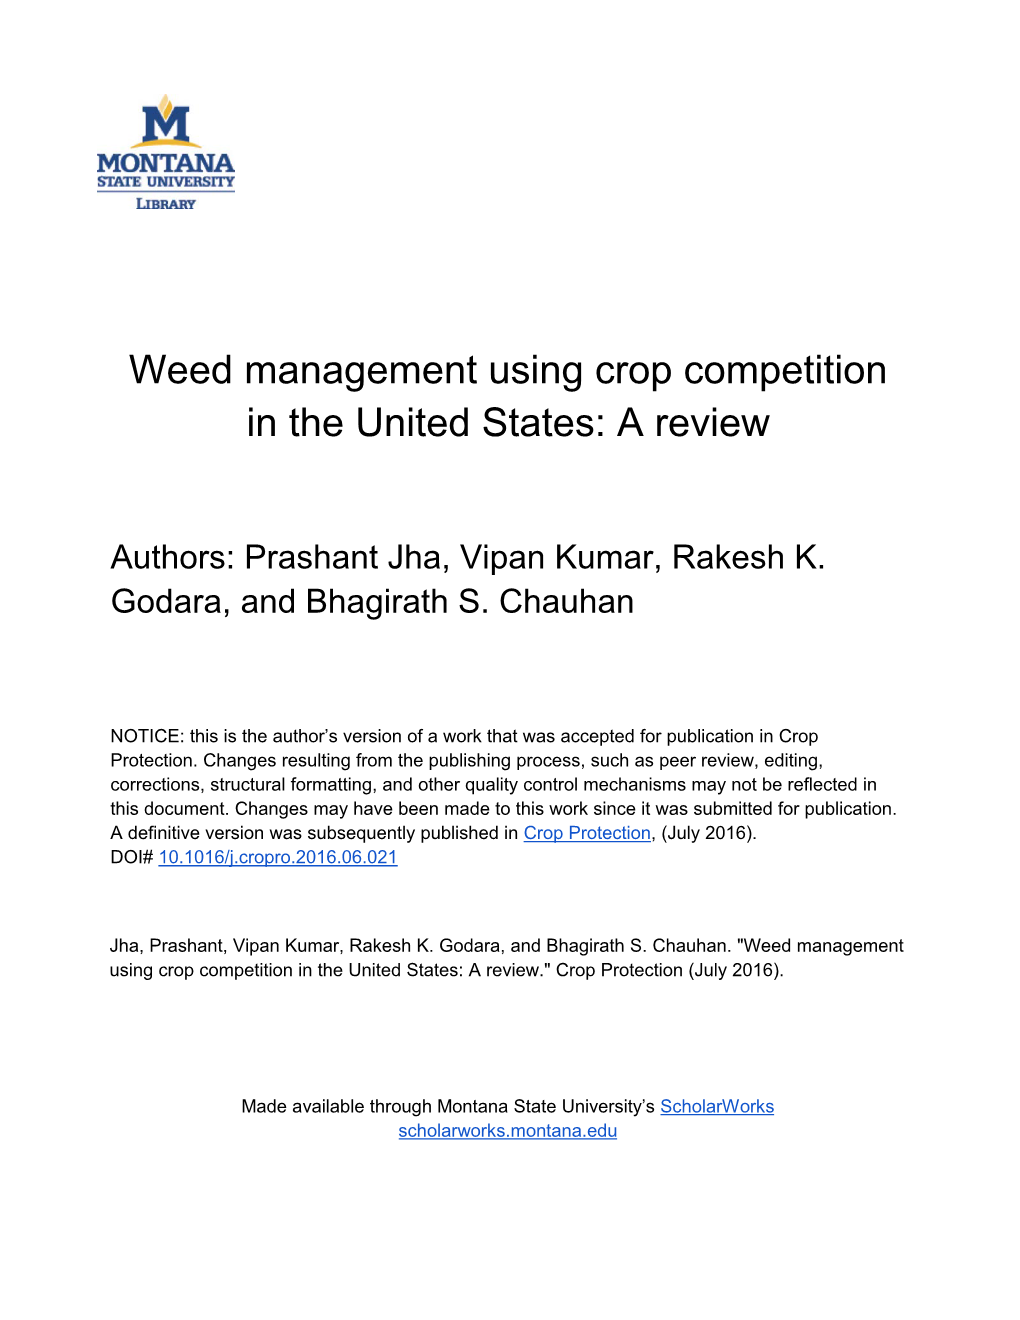 Weed Management Using Crop Competition in the United States: a Review